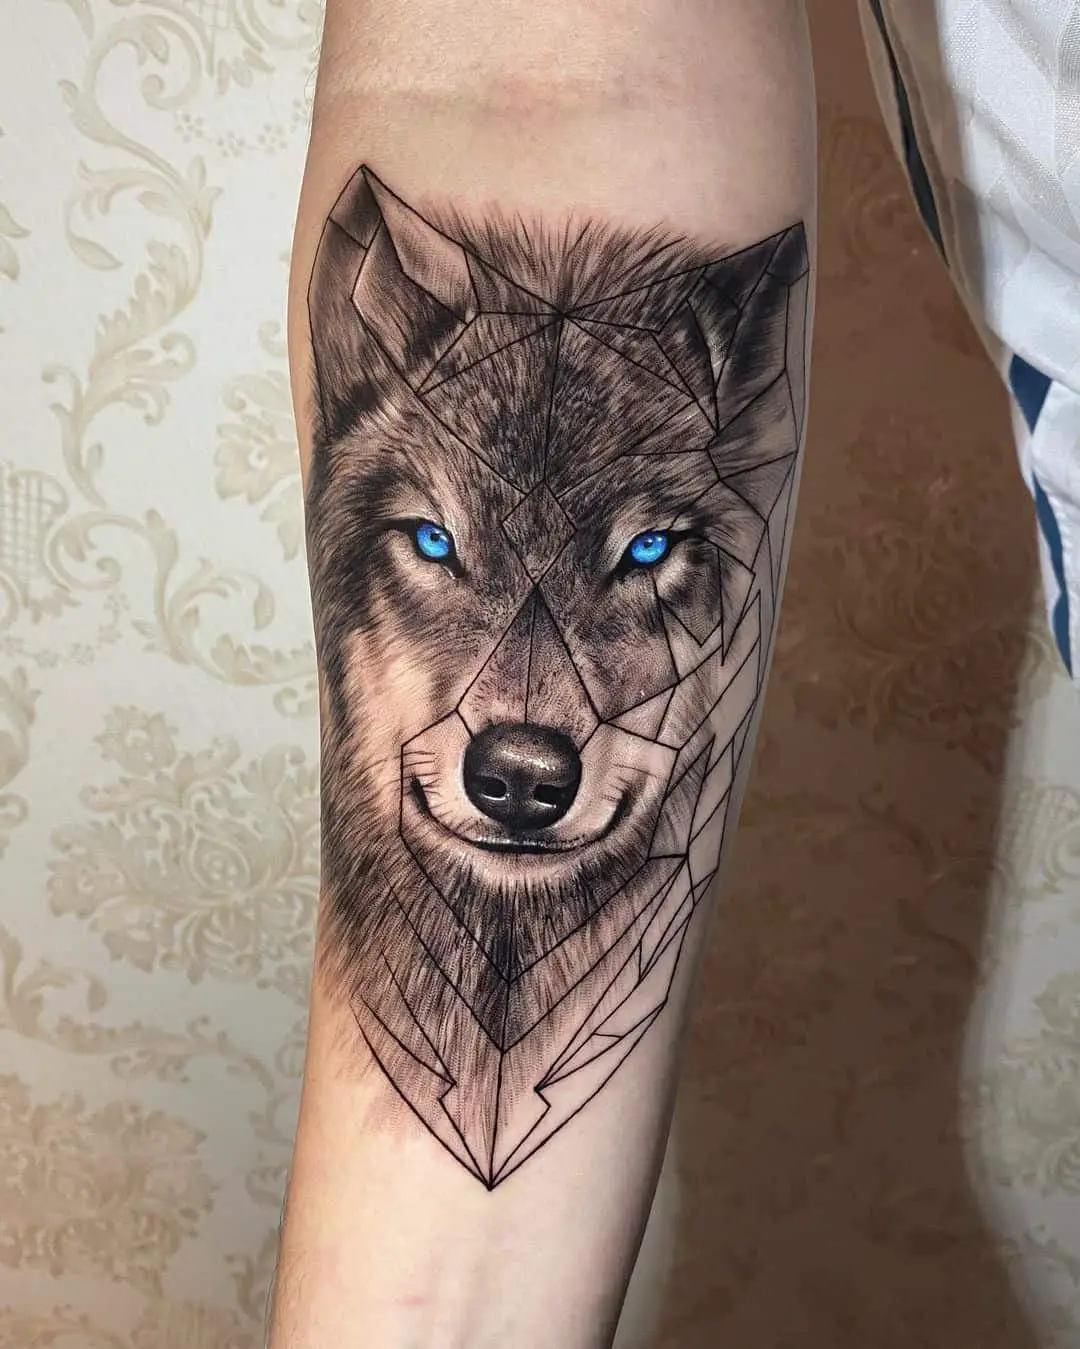 gabrielsouza.tattoo realism wolf face tattoo on forearm